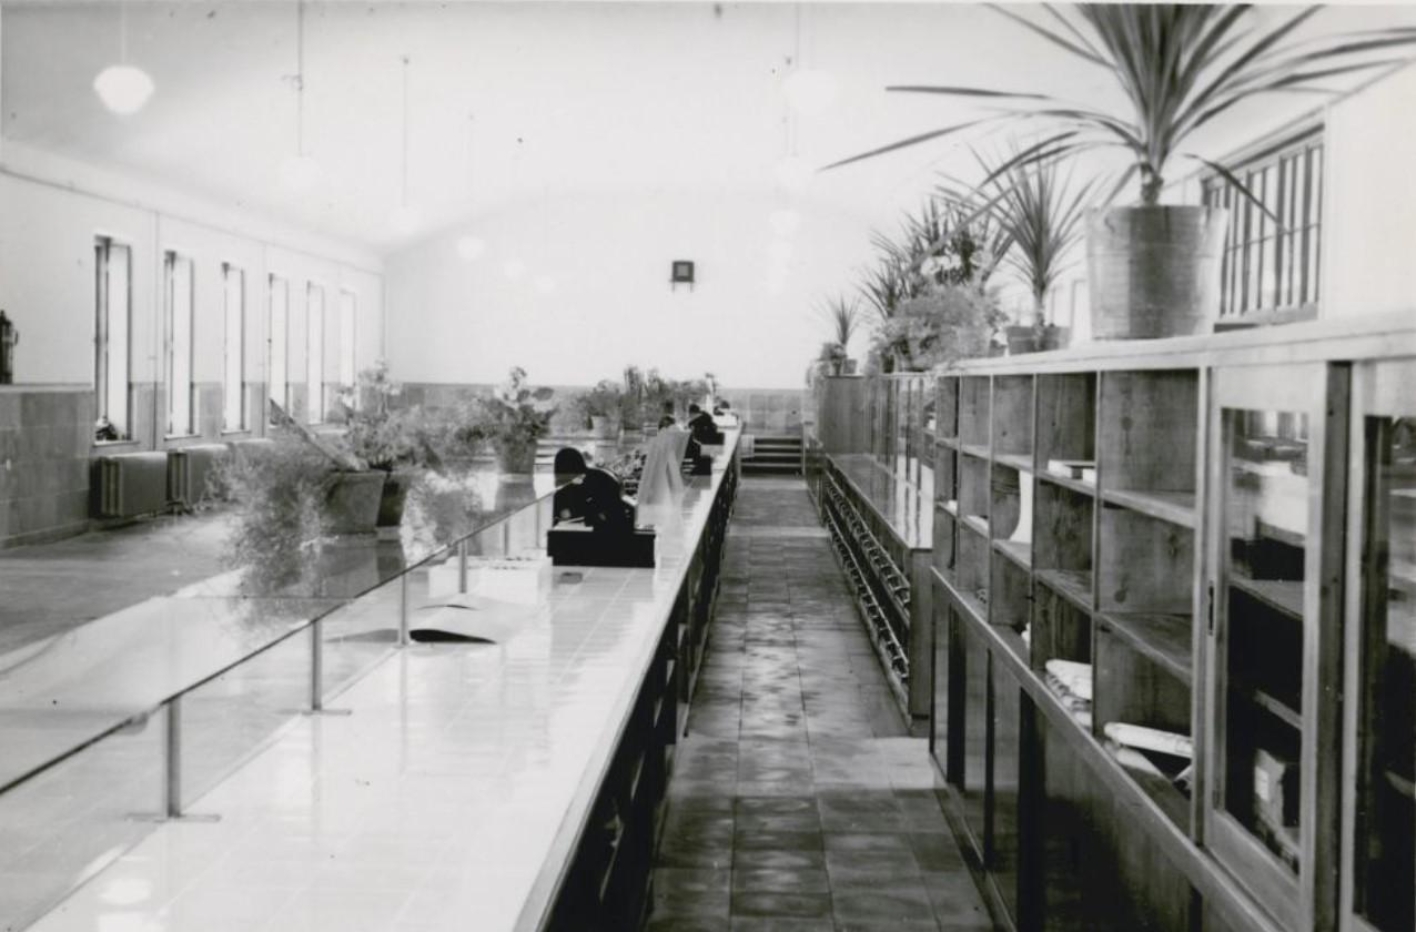 The photo provides a view behind the sales counter of the prisoners' canteen. On the shelves and in the drawers behind the counter you can see some goods, but most of them are empty. On the shelves are palm plants in tubs for decoration. Three cash registers are placed on the counter at regular intervals. The counter is also decorated with smaller potted plants.